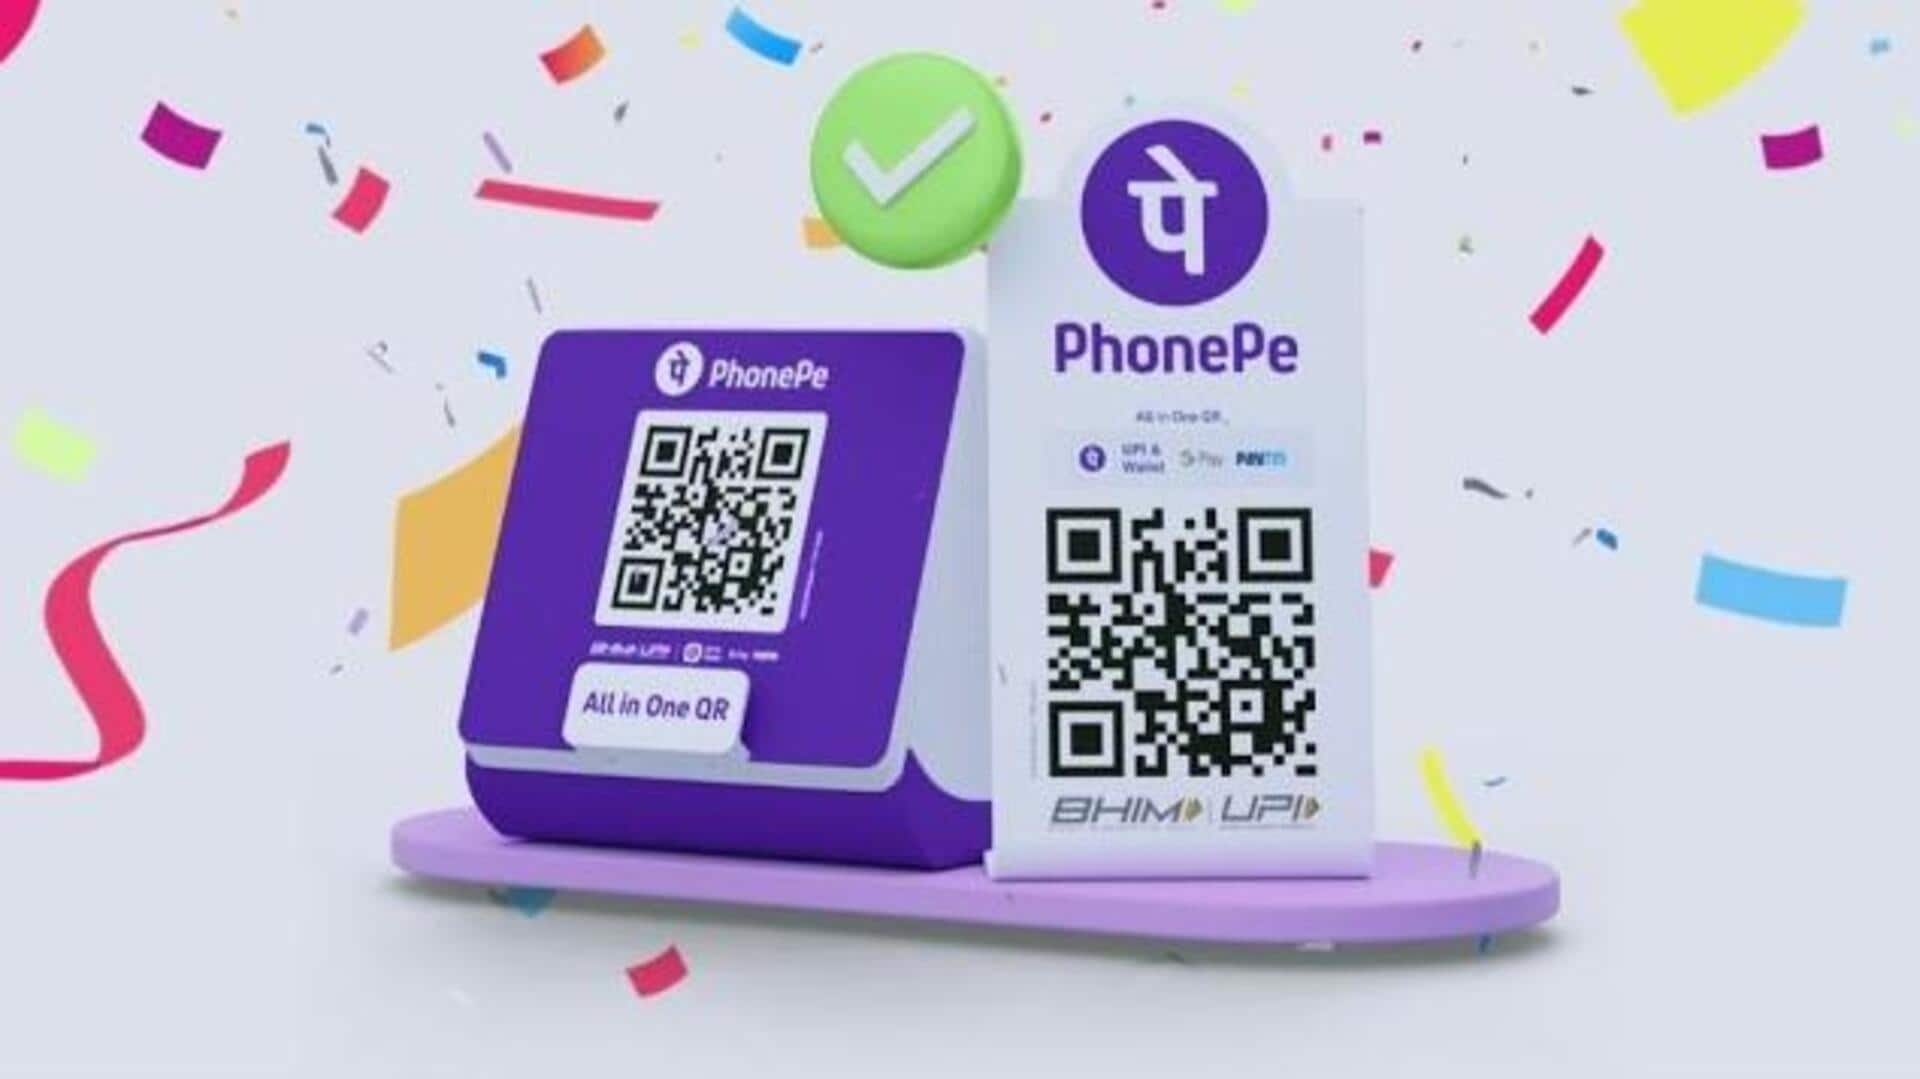 Amitabh Bachchan's voice to authenticate payments on PhonePe SmartSpeakers